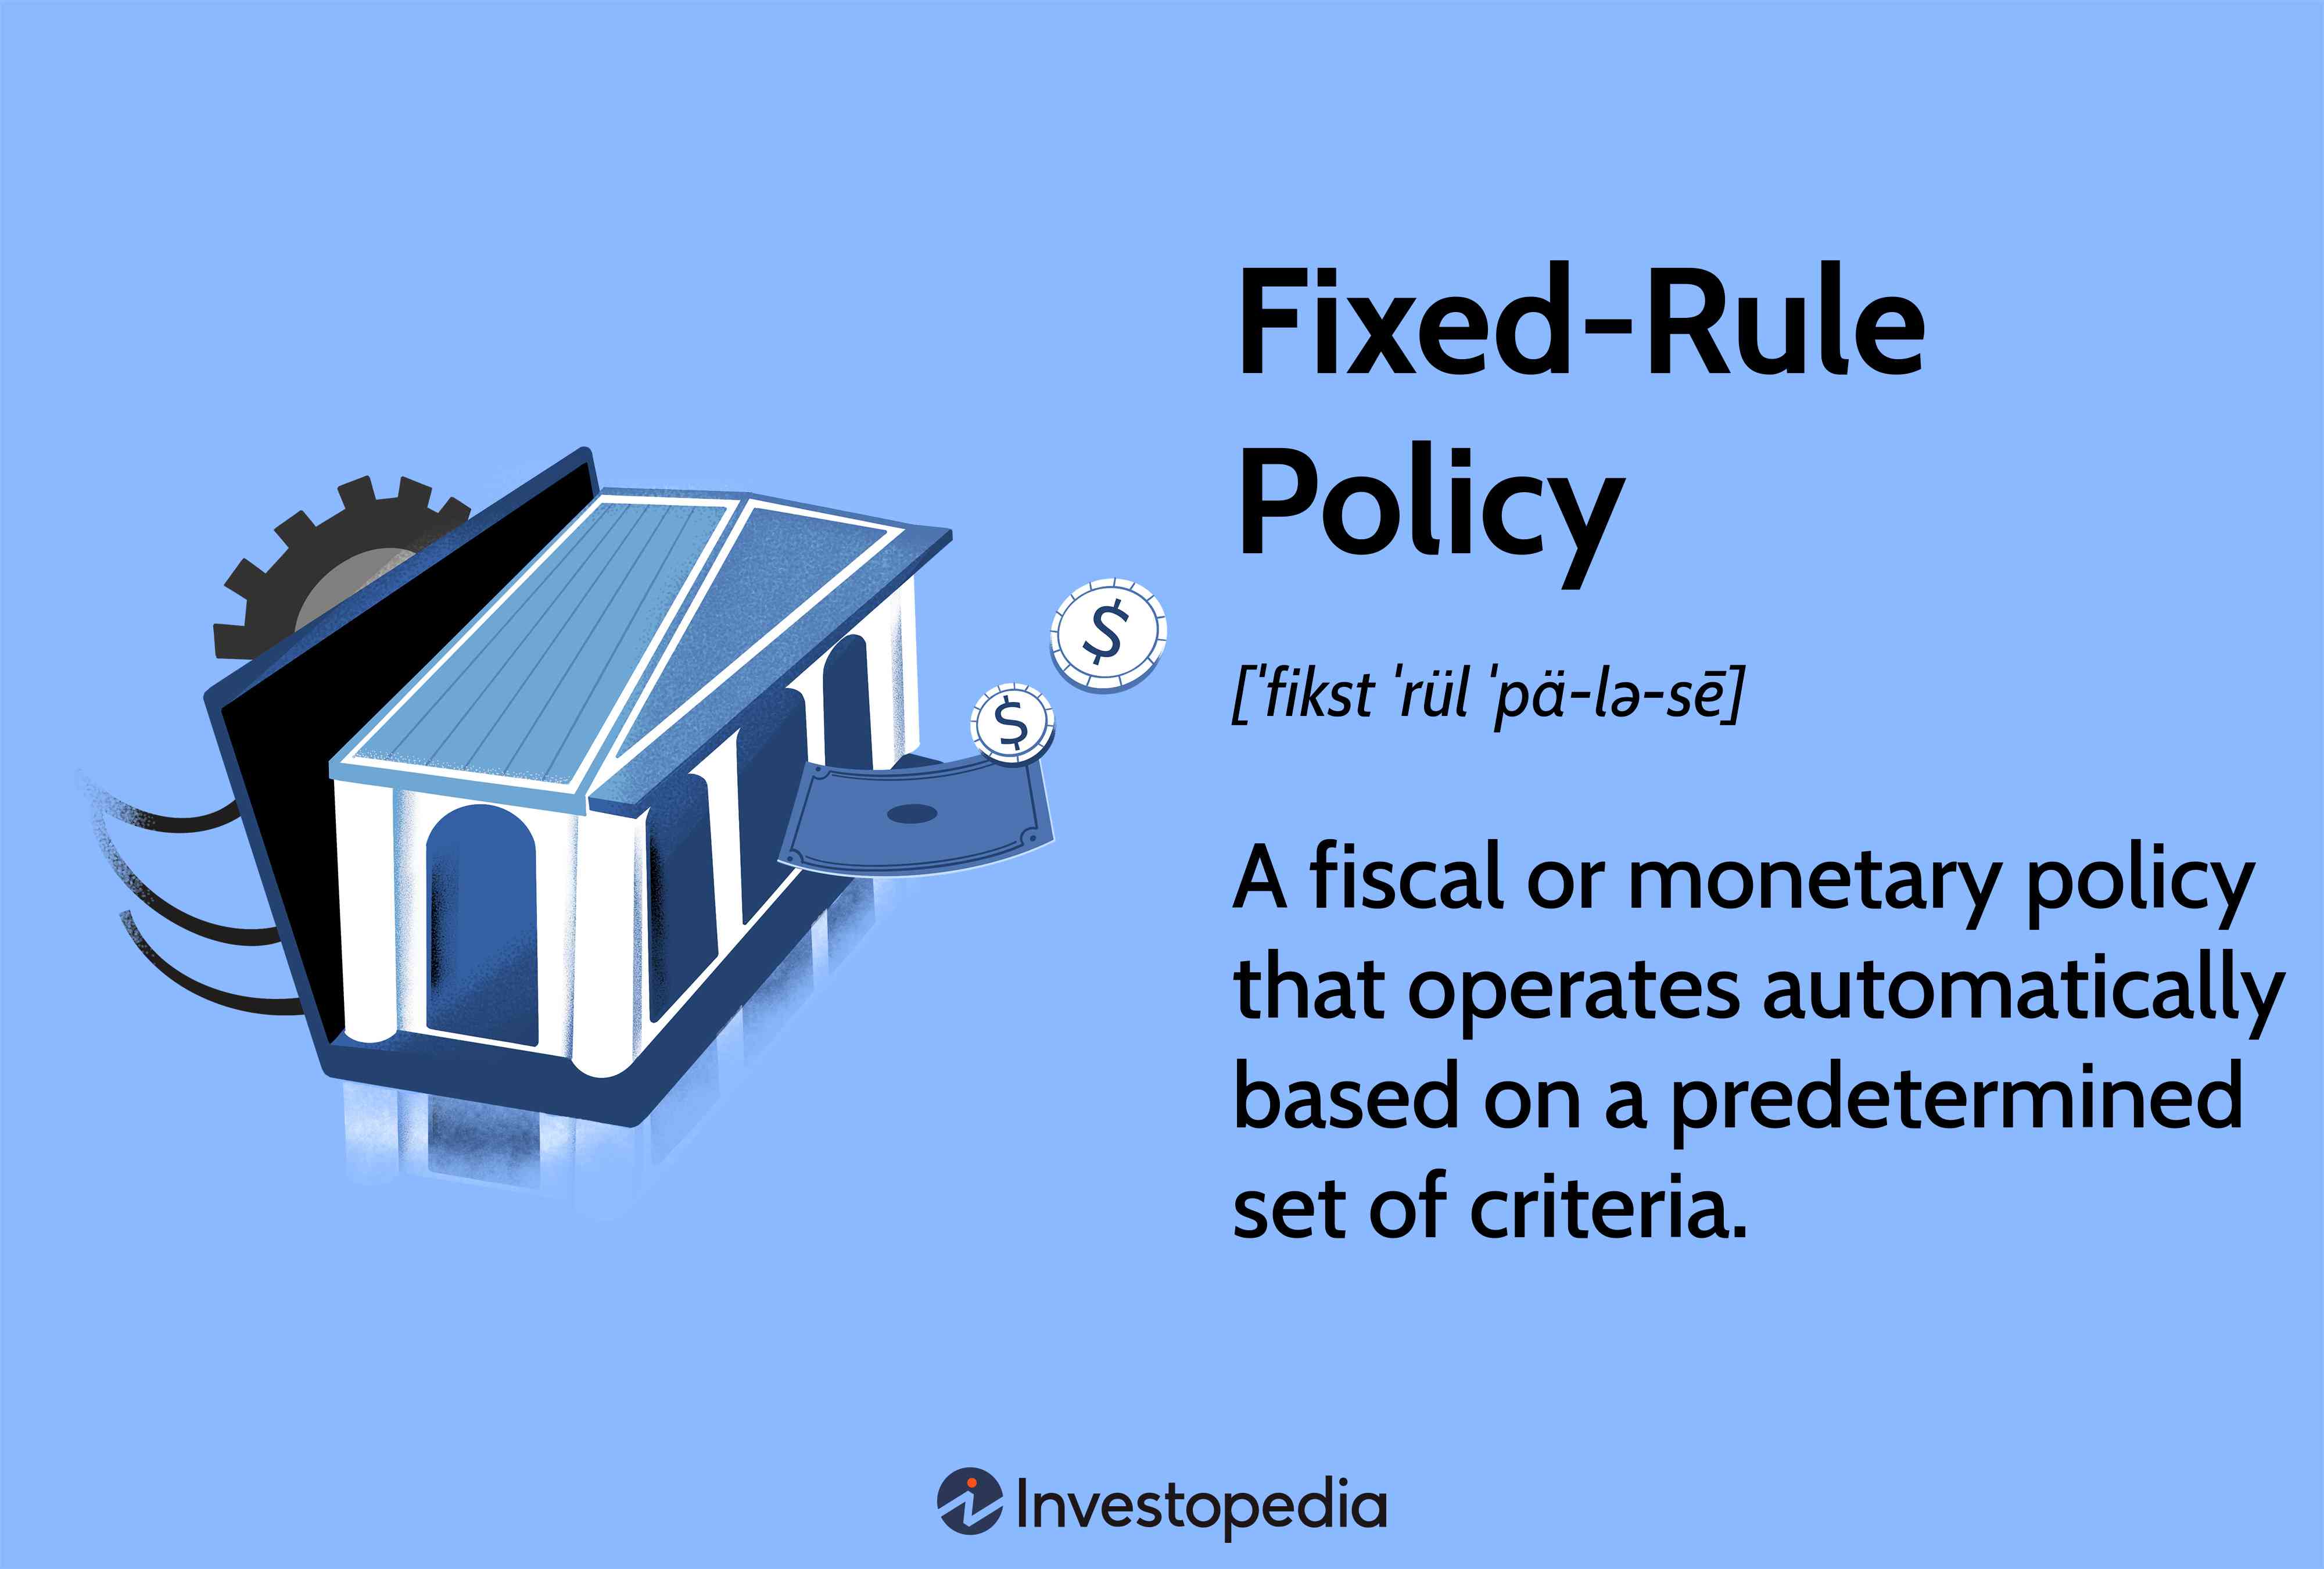 Fixed-Rule Policy Defintion